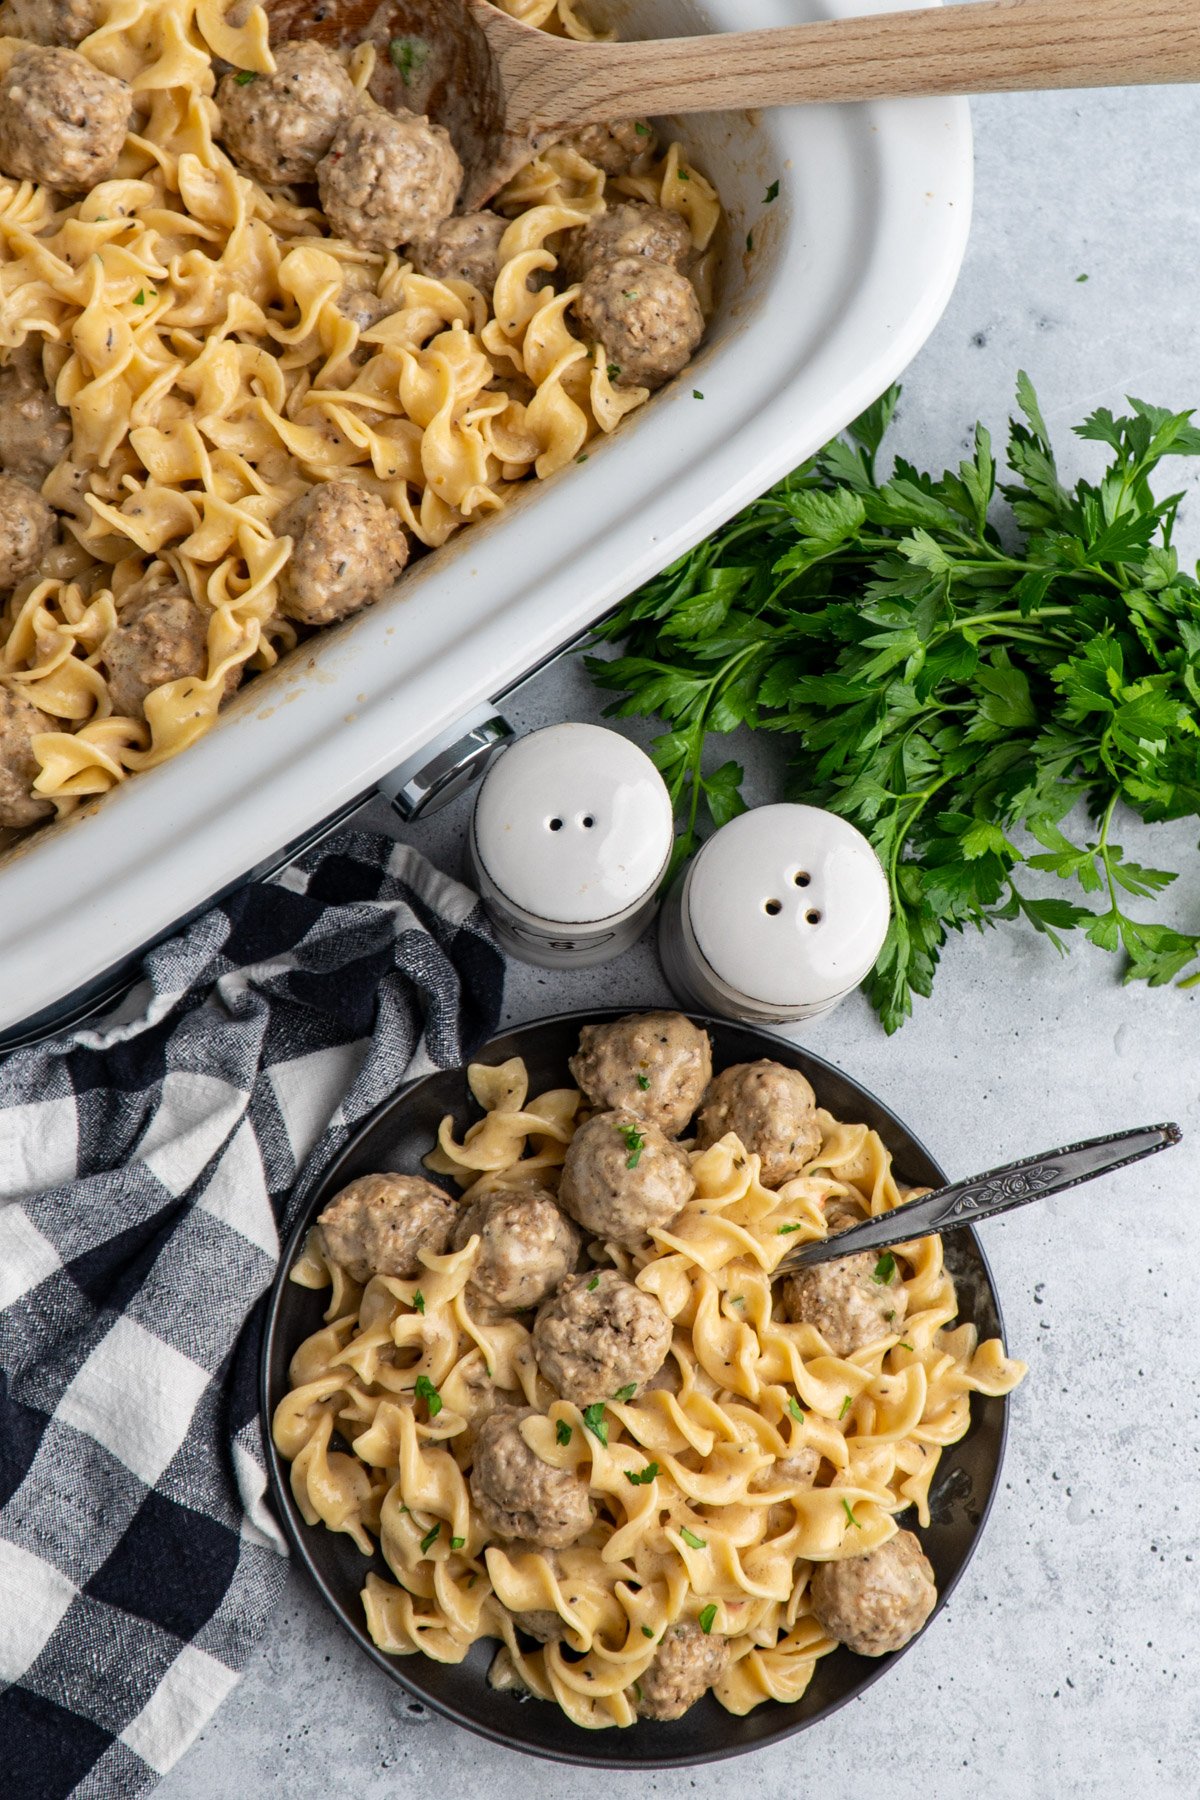 Overhead look at Swedish meatballs on a plate and in a slow cooker.